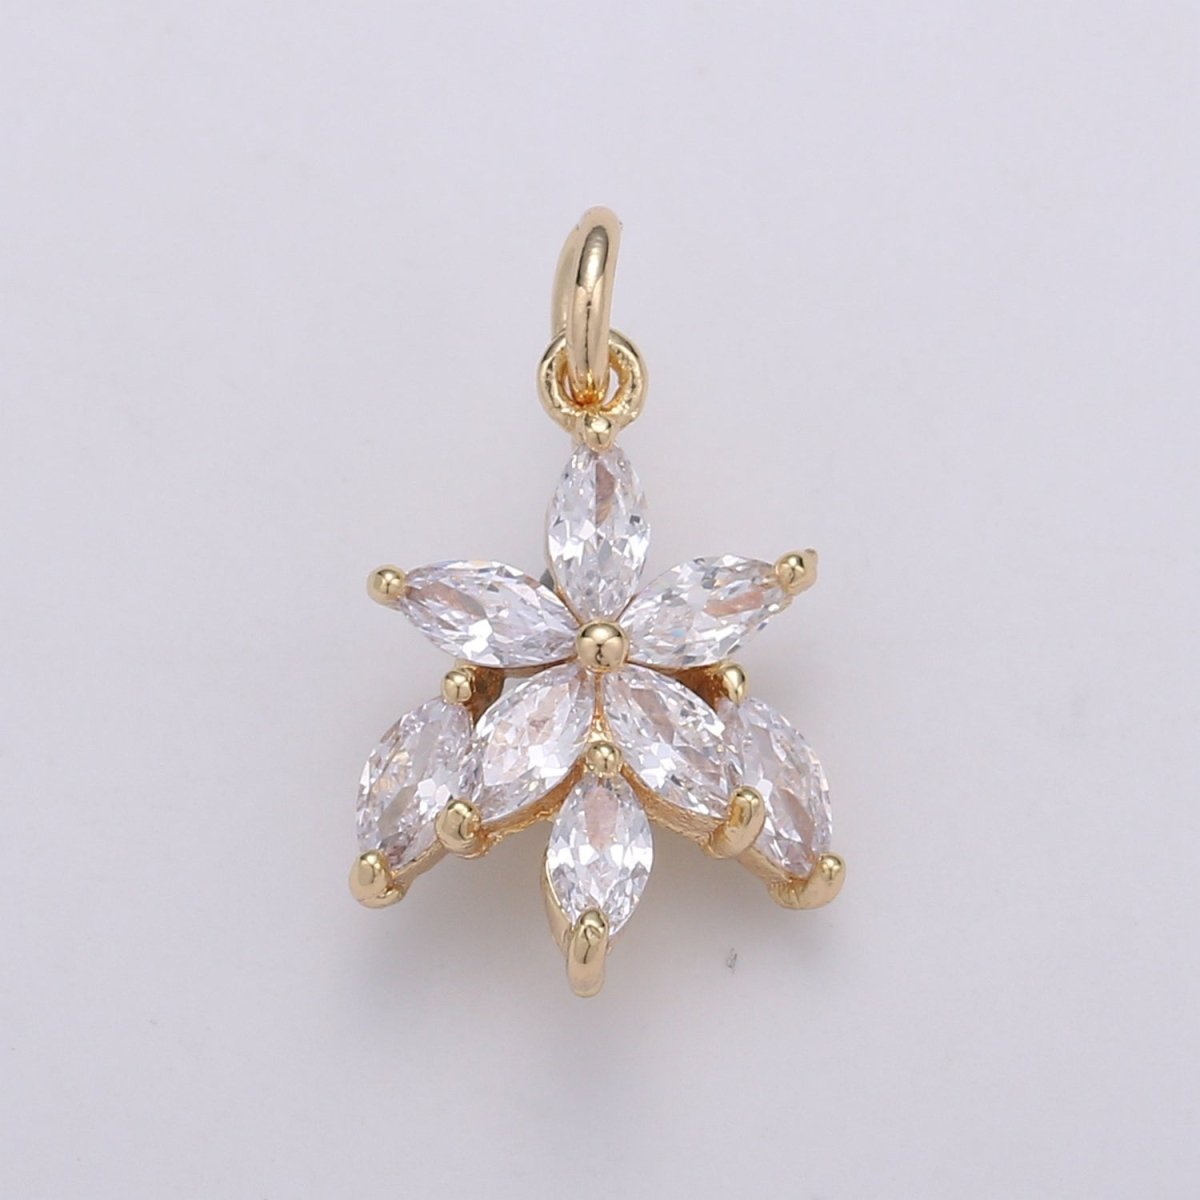 Tiny Small 18K Gold Filled Flower Charm Pave CZ Cubic Zirconia Charm for Bracelet Necklace Earring Charm Supply L-071 - DLUXCA